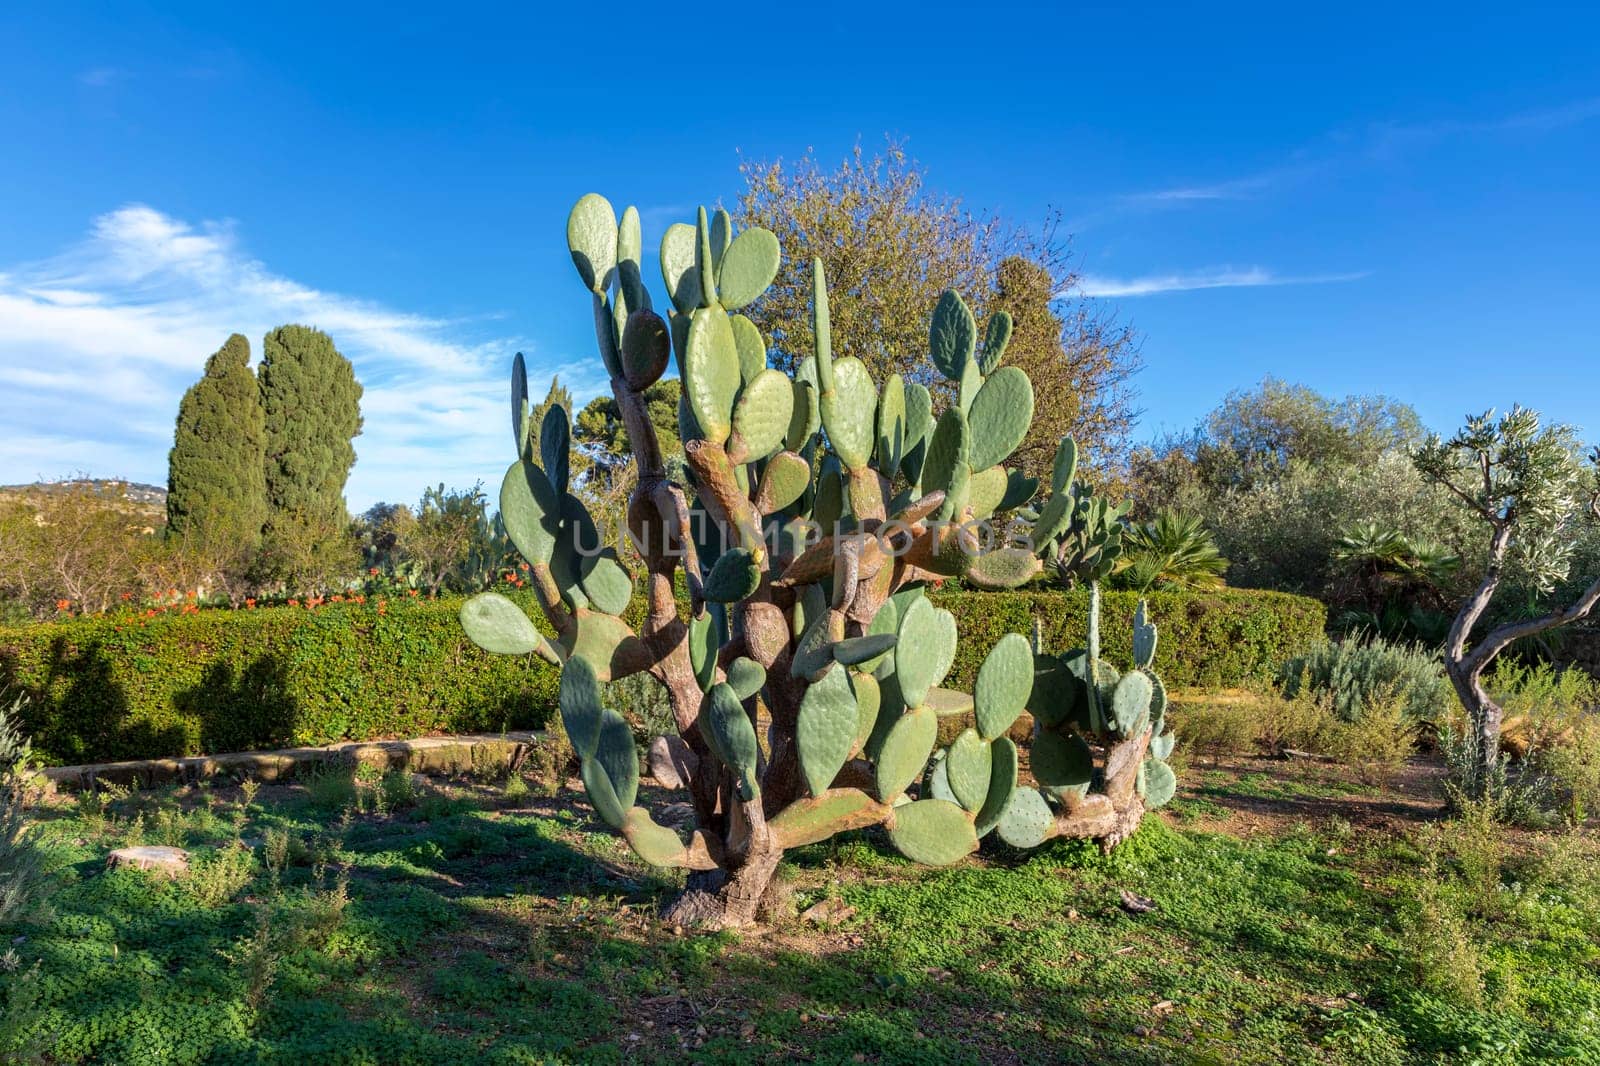 Big cactus at garden of the Villa Aurea in Valley of the Temples, Agrigento, Sicily, Italy by EdVal